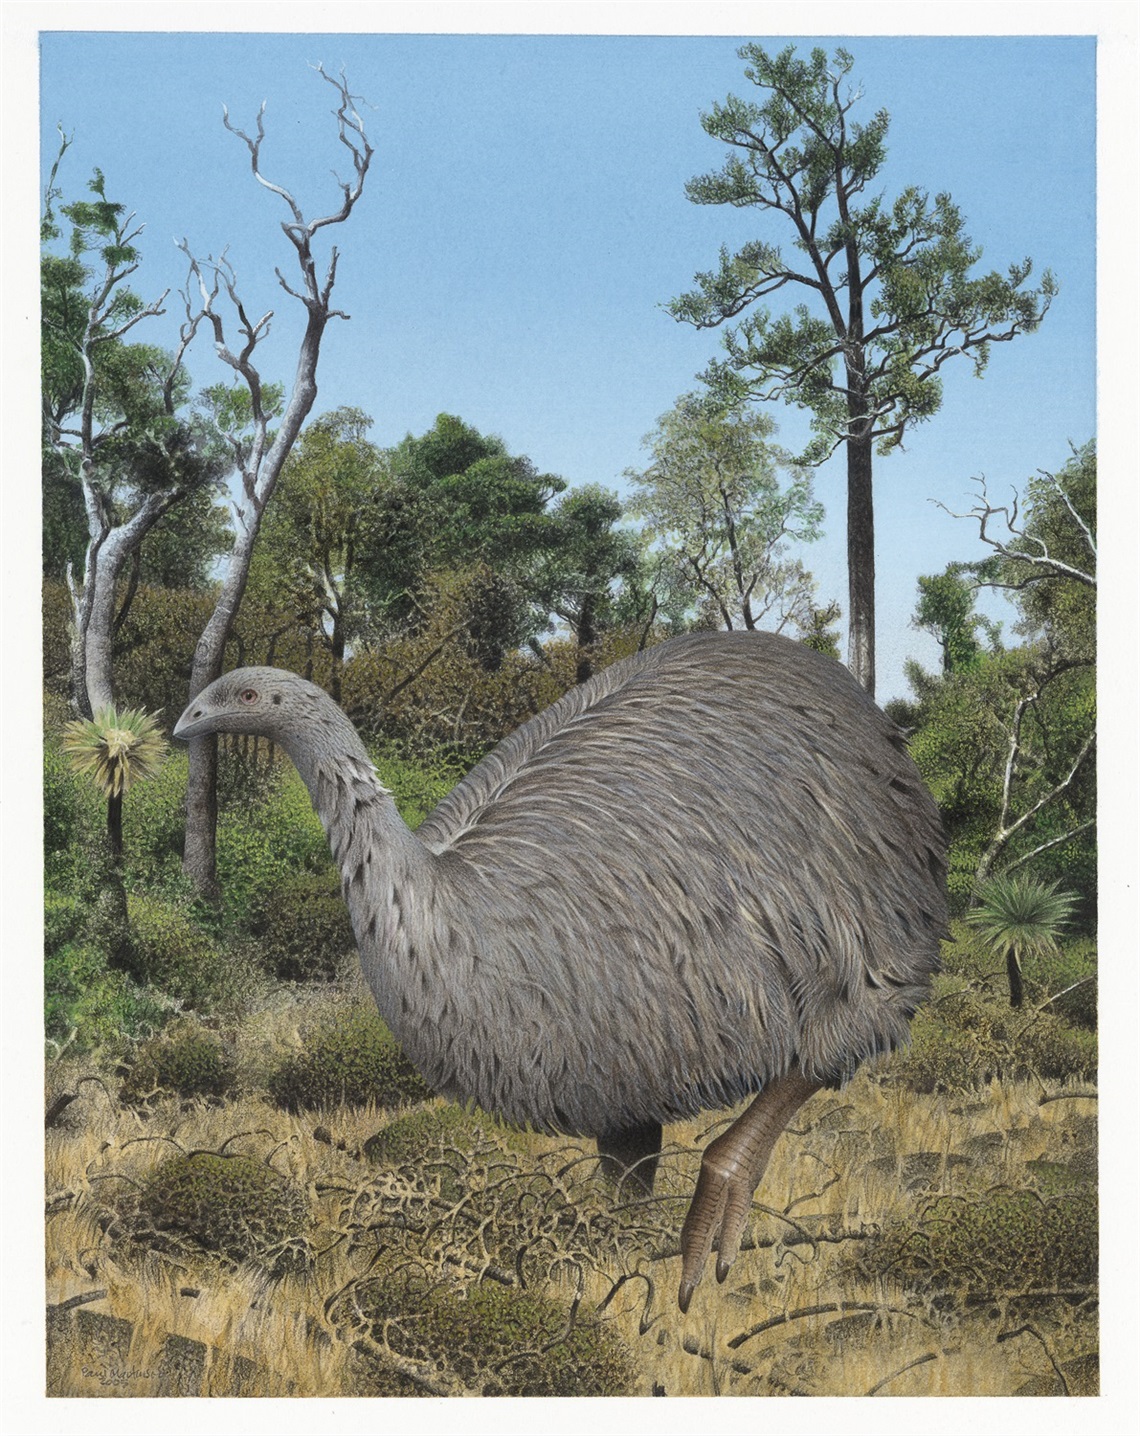 Image: Eastern moa. Emeus crassus. From the book Extinct Birds of New Zealand, 2005, Masterton, by Paul Martinson. © Te Papa. CC BY-NC-ND 4.0. Te Papa (2006-0010-1/23)